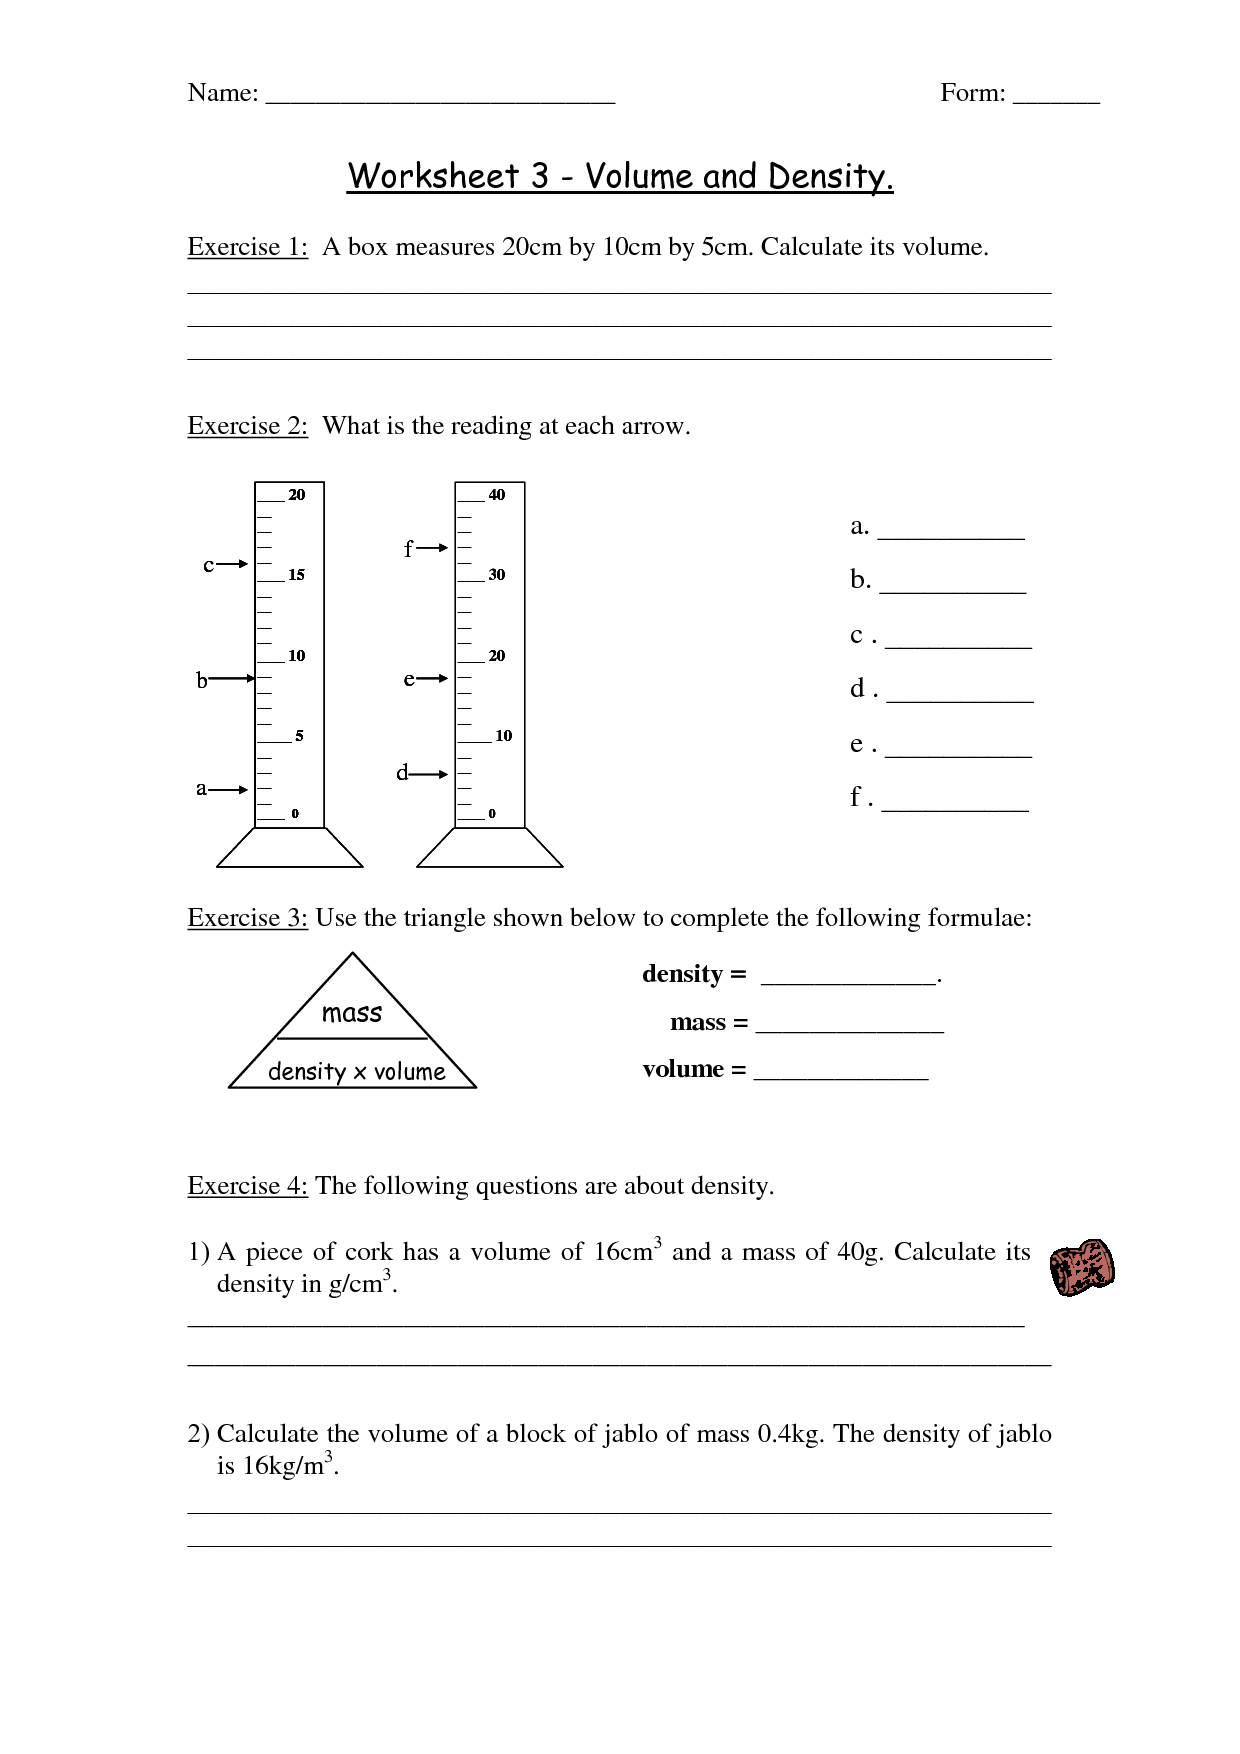 14-best-images-of-mass-and-volume-worksheets-density-mass-and-volume-worksheet-density-mass